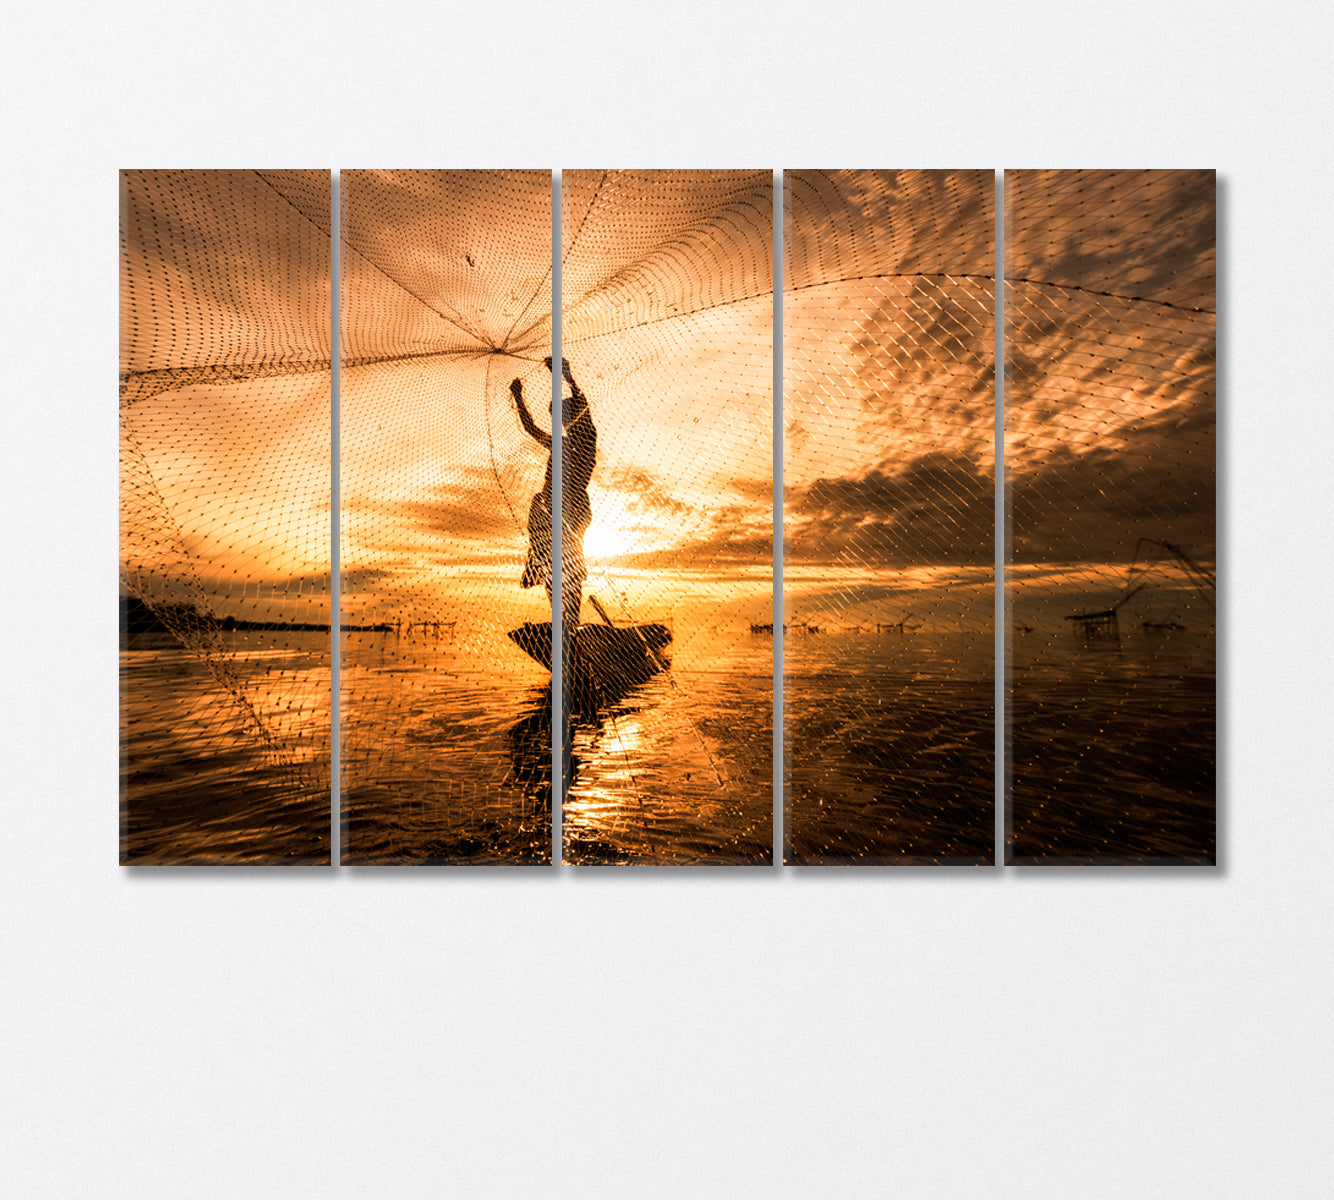 Fisherman Silhouette on Boat with Fishing Net Canvas Print-Canvas Print-CetArt-5 Panels-36x24 inches-CetArt